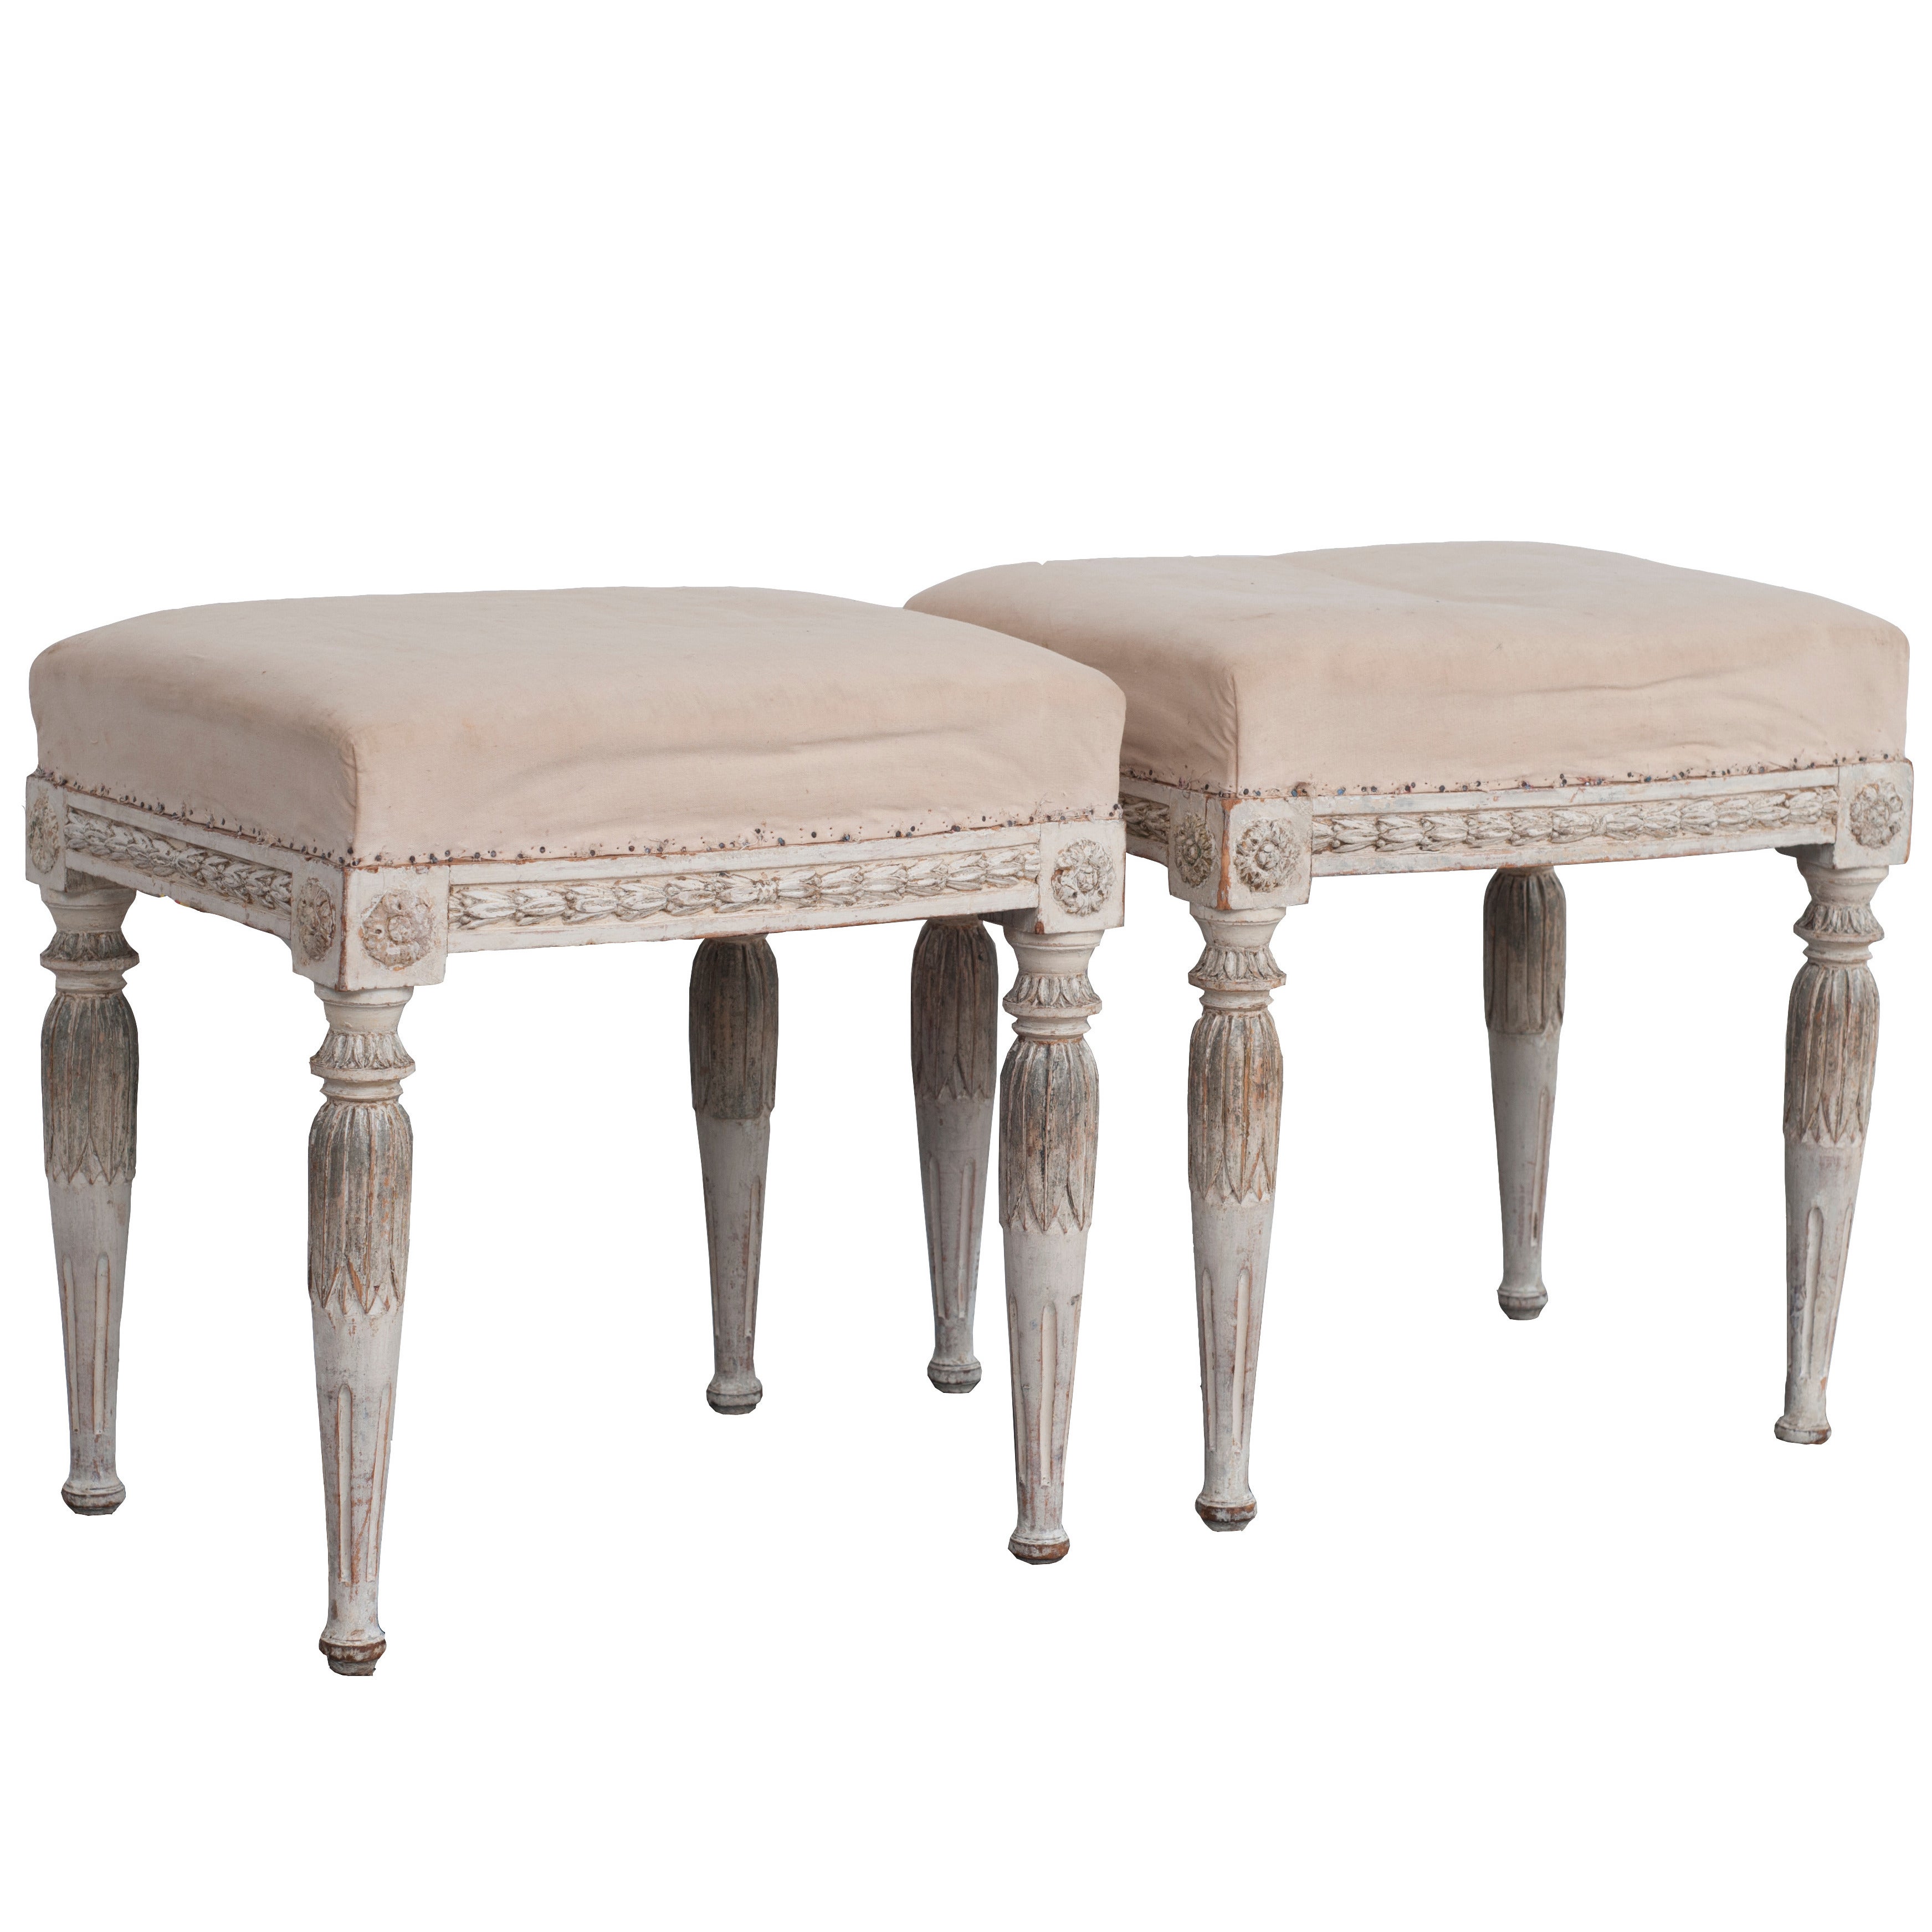 A Very Fine Pair Pair of Painted  Gustavian Stools with carved legs